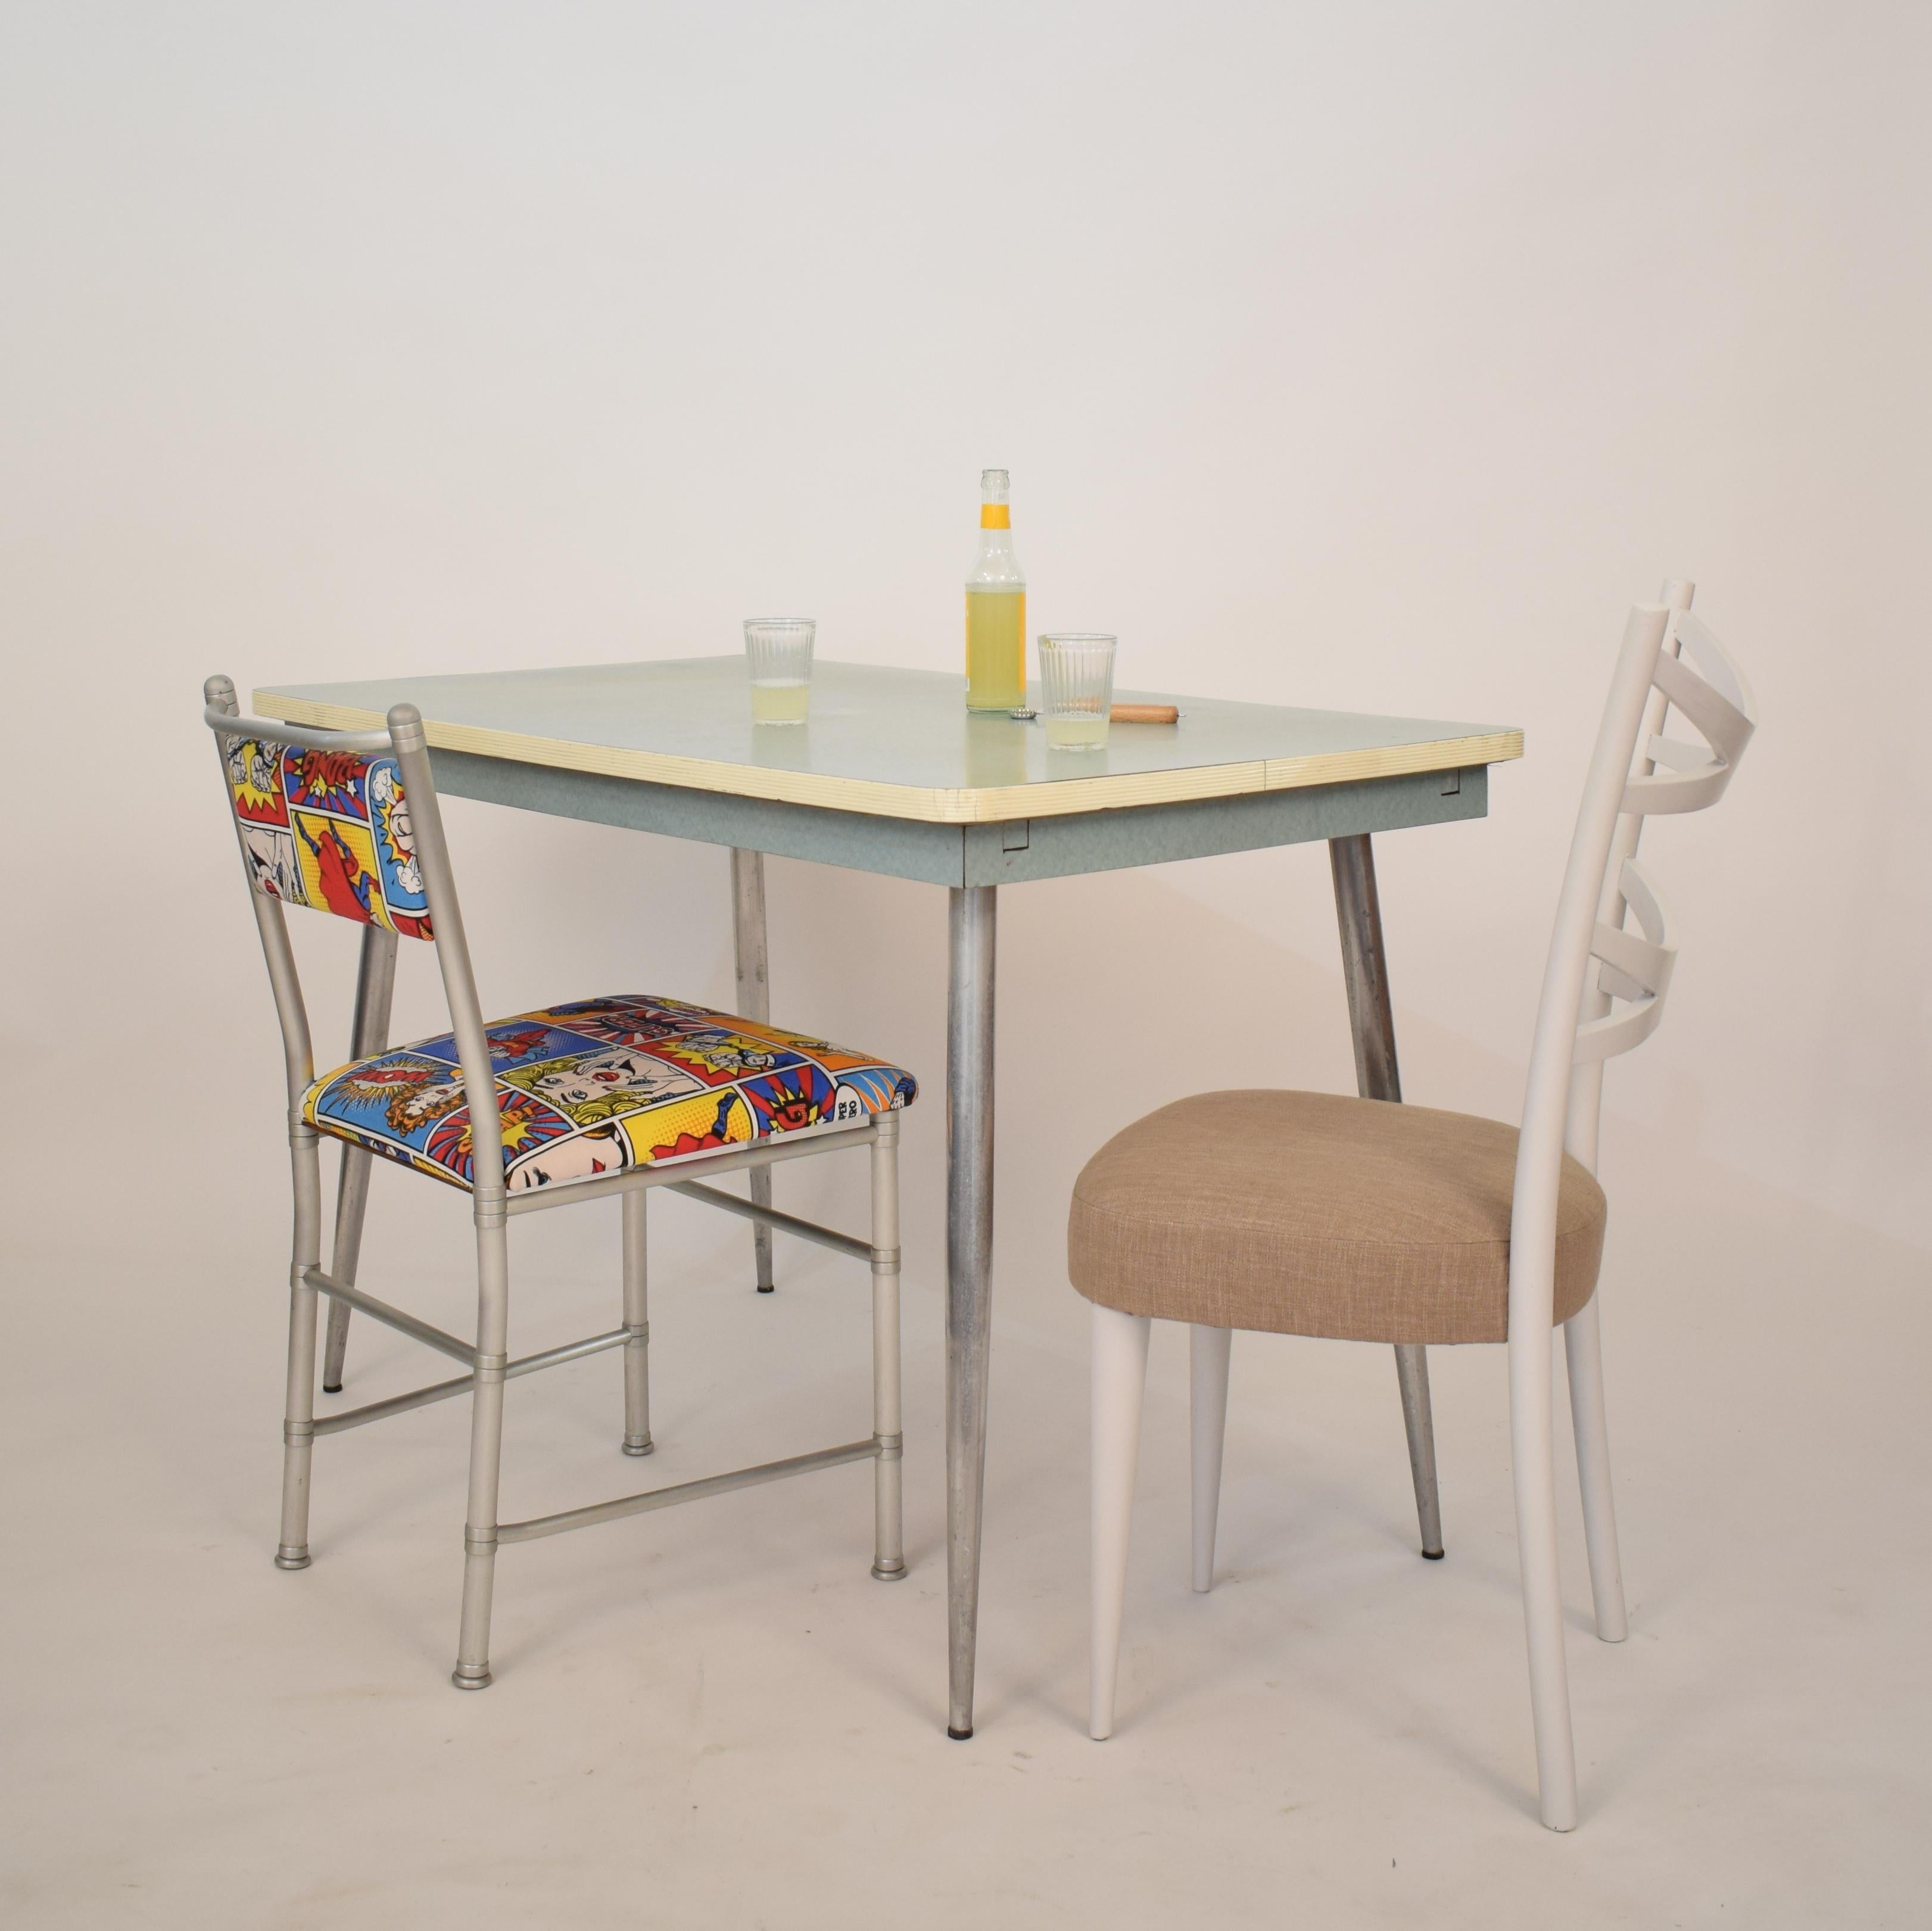 This authentic and beautiful midcentury Italian kitchen dining table was made in the 1950s.
It is a very nice original condition with great patina.
The top and the edge are made out of wood and is veneered with turquoise Formica.
It comes with